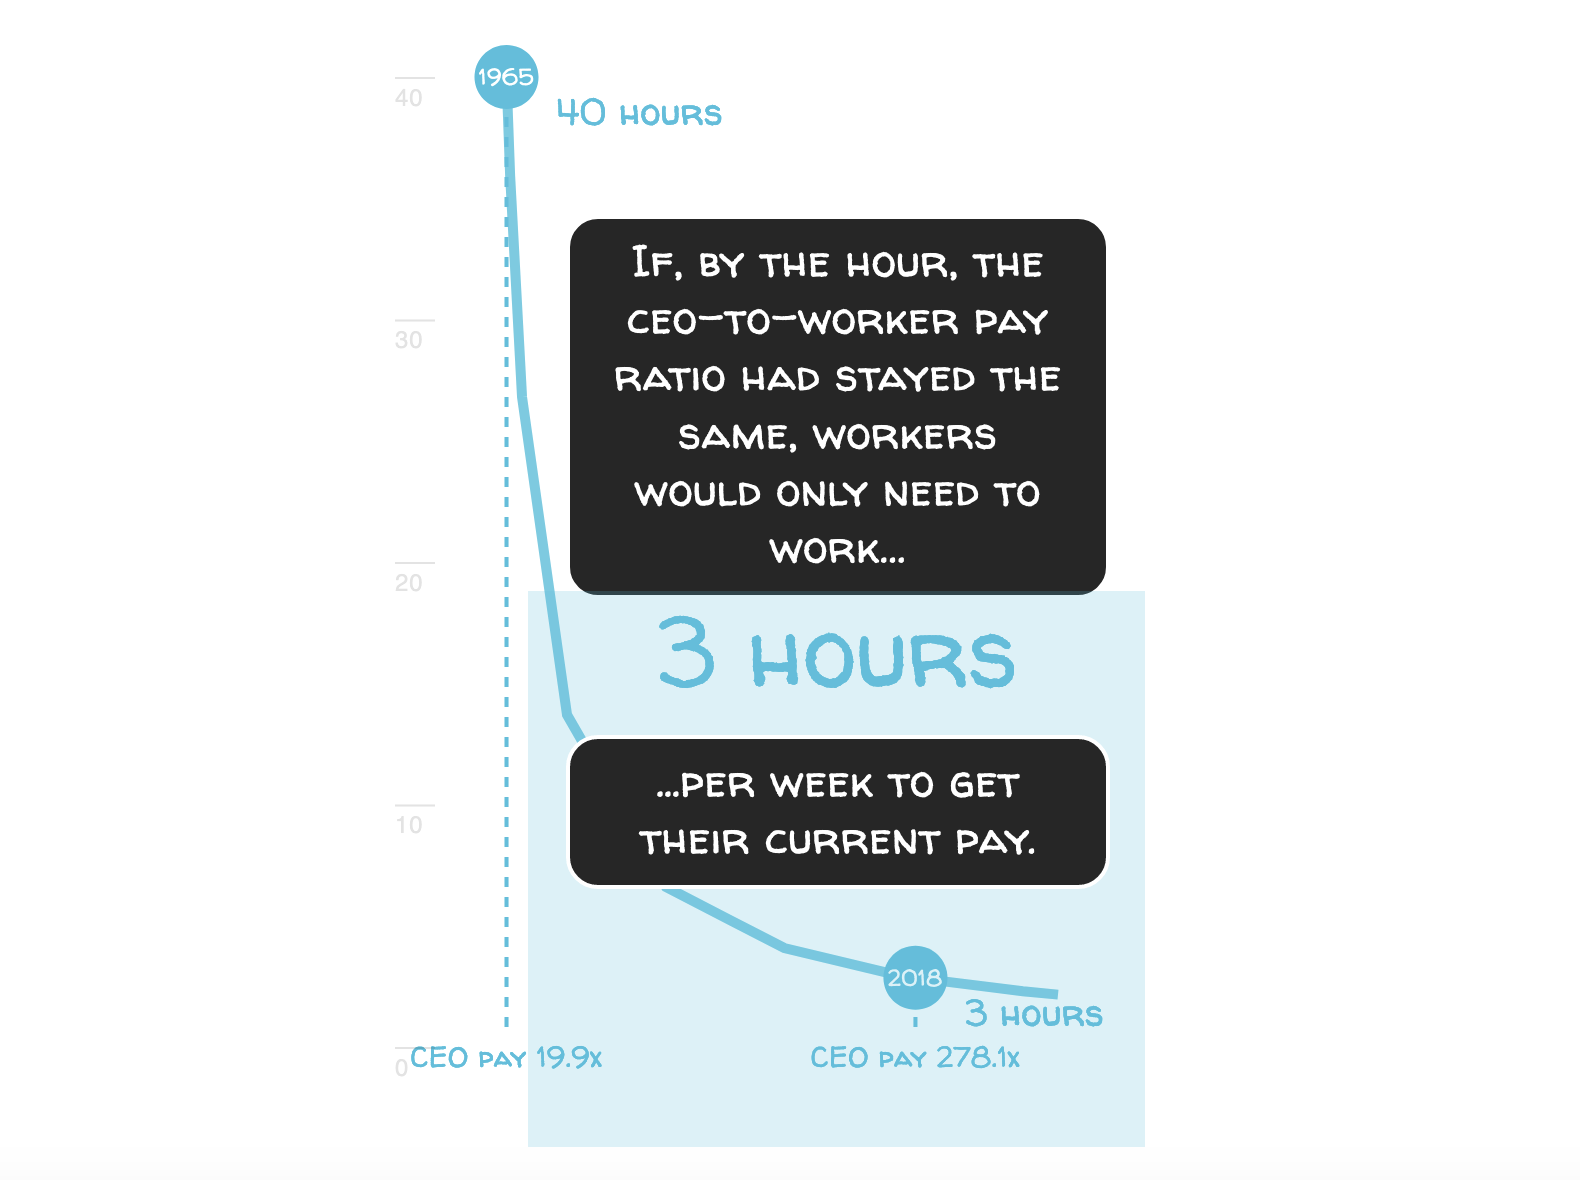 A chart showing the pay-to-hours-worked ratio for CEOs and workers